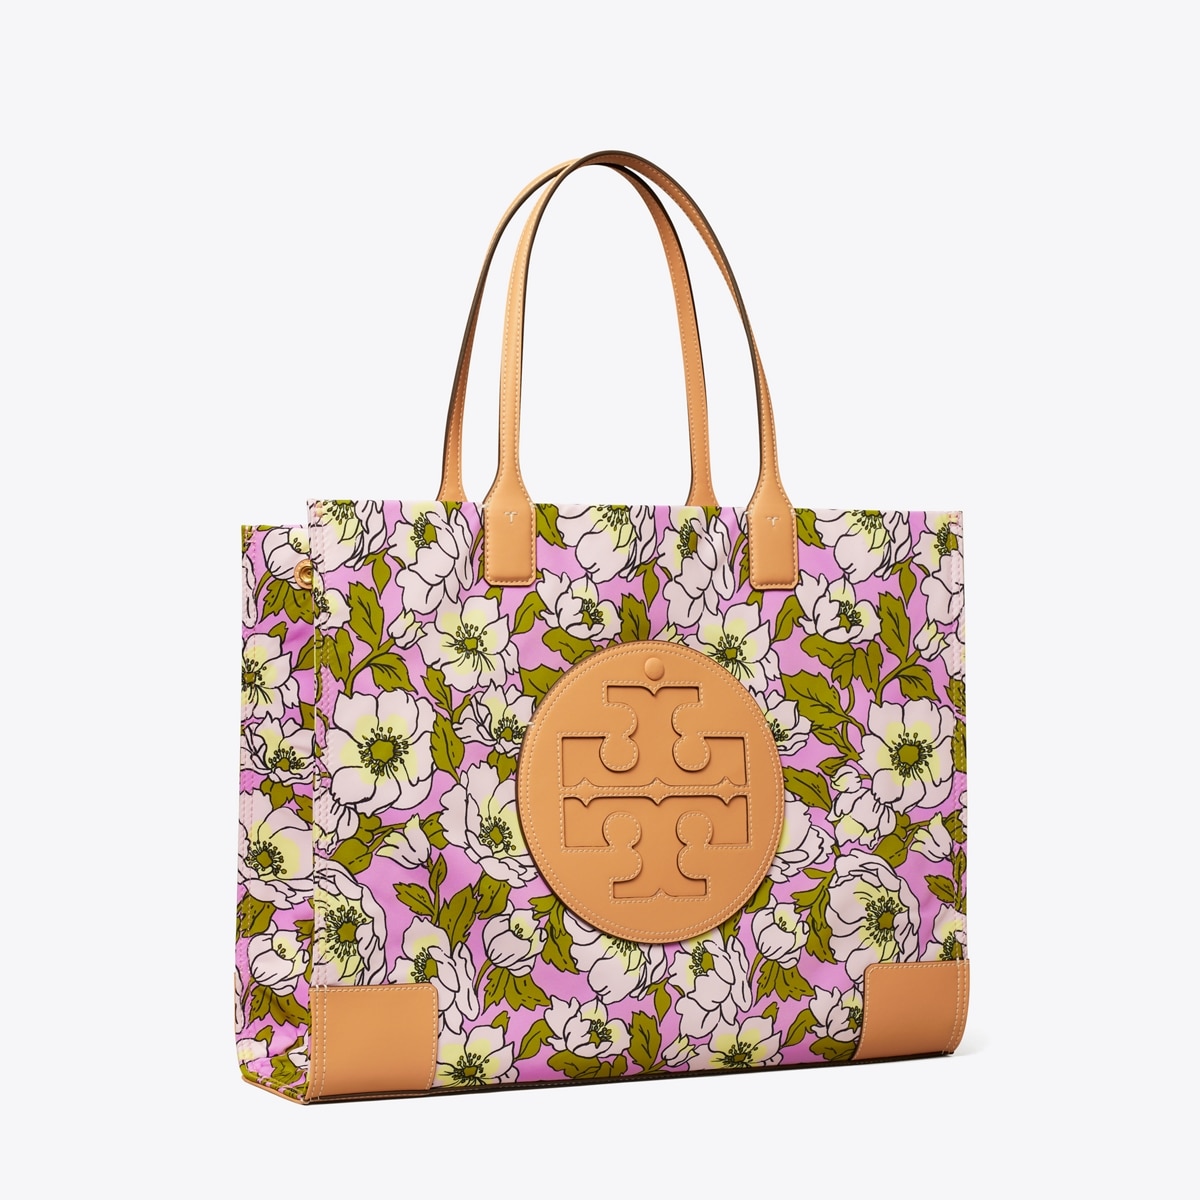 Why we both bought the Tory Burch York Tote for work - initial